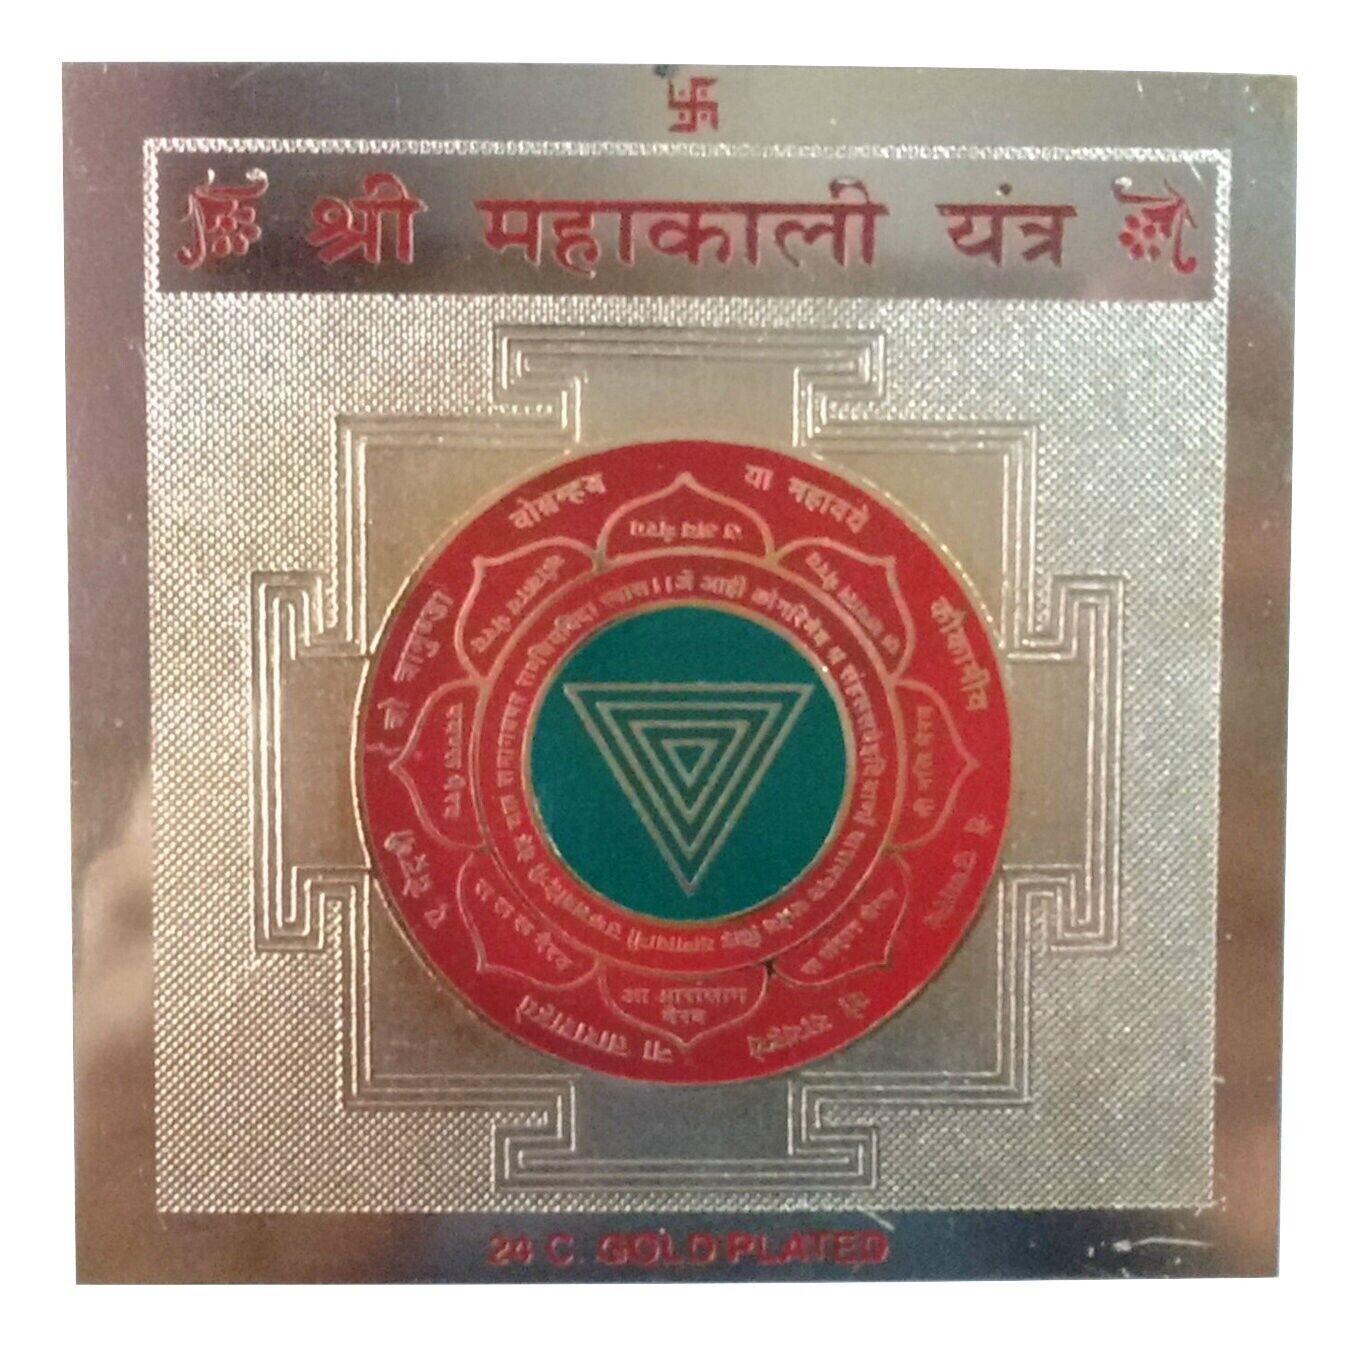 Kali Yantra Kaali Yantram For Protect From Enemies 8 cm x 8 cm Energized